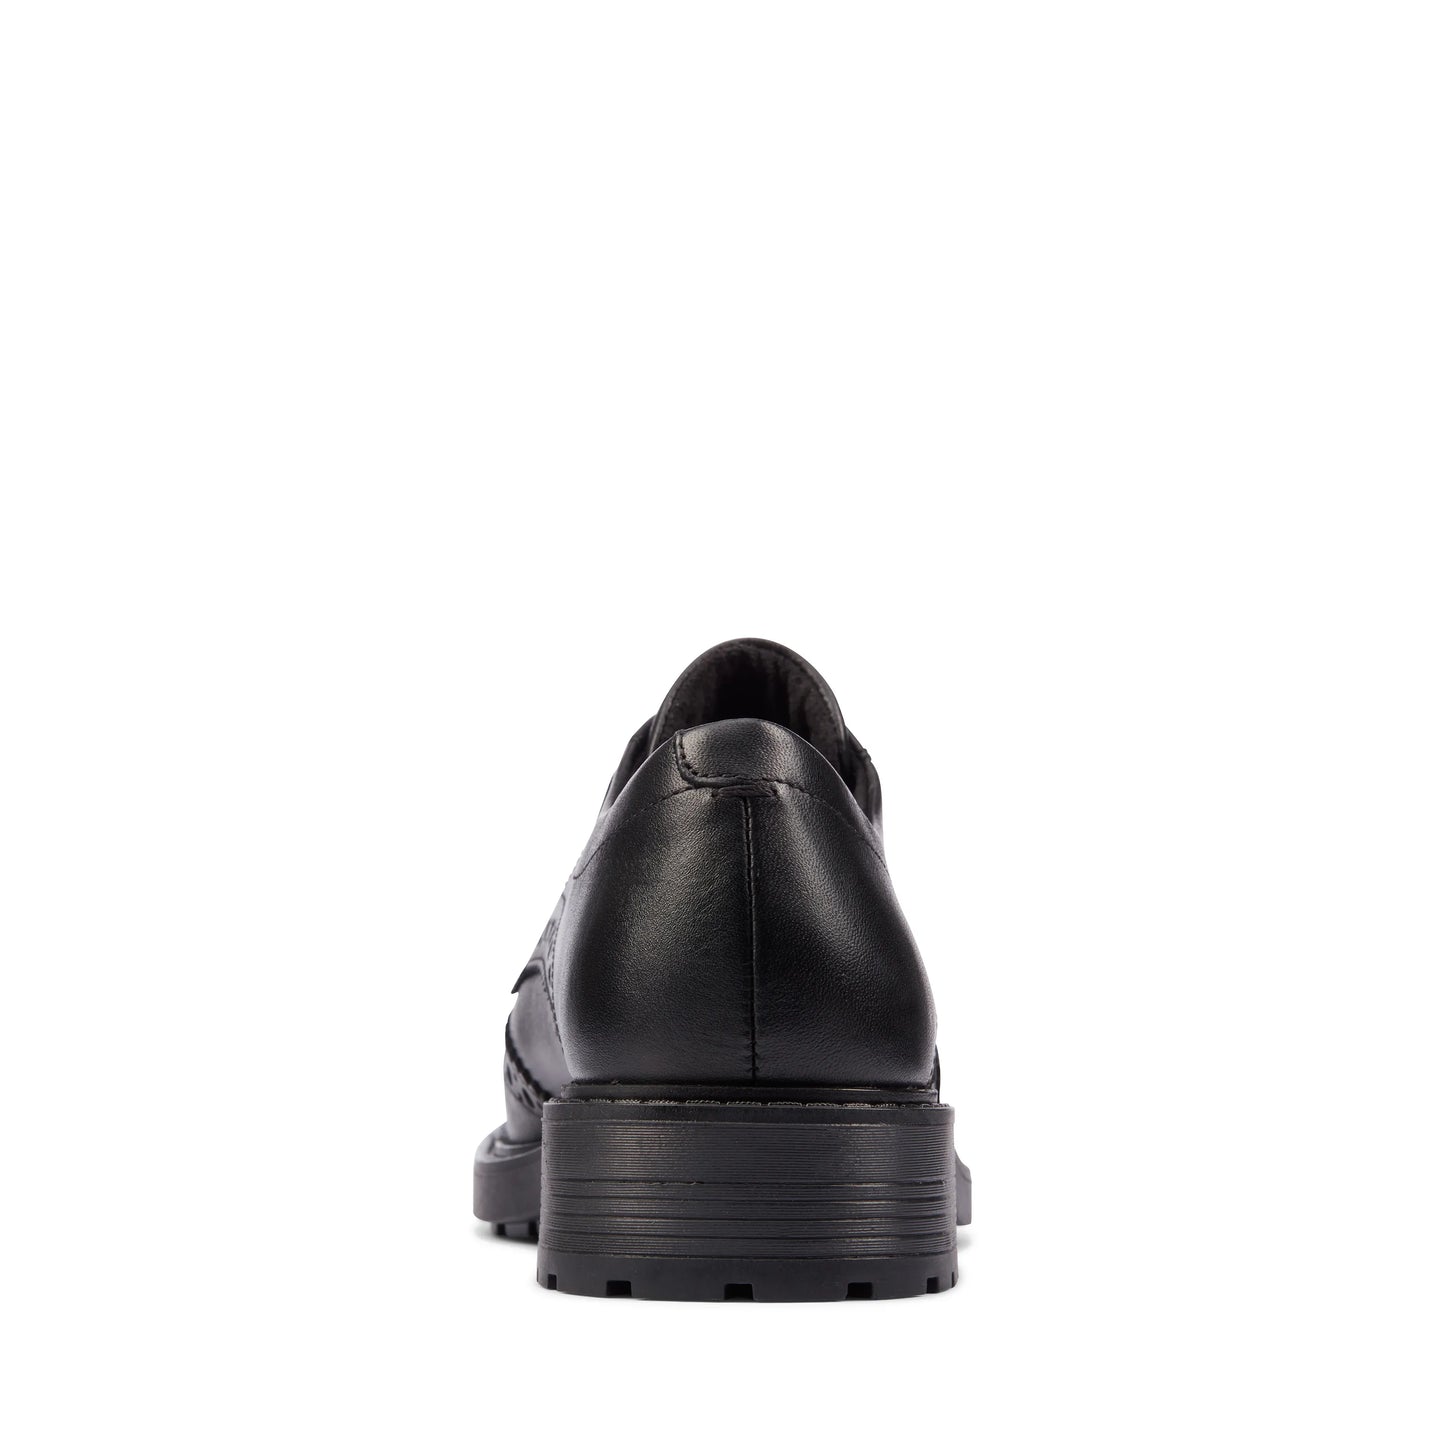 CLARKS | DERBY SHOES FOR WOMEN | ORINOCO2 LIMIT BLACK LEATHER | NERO